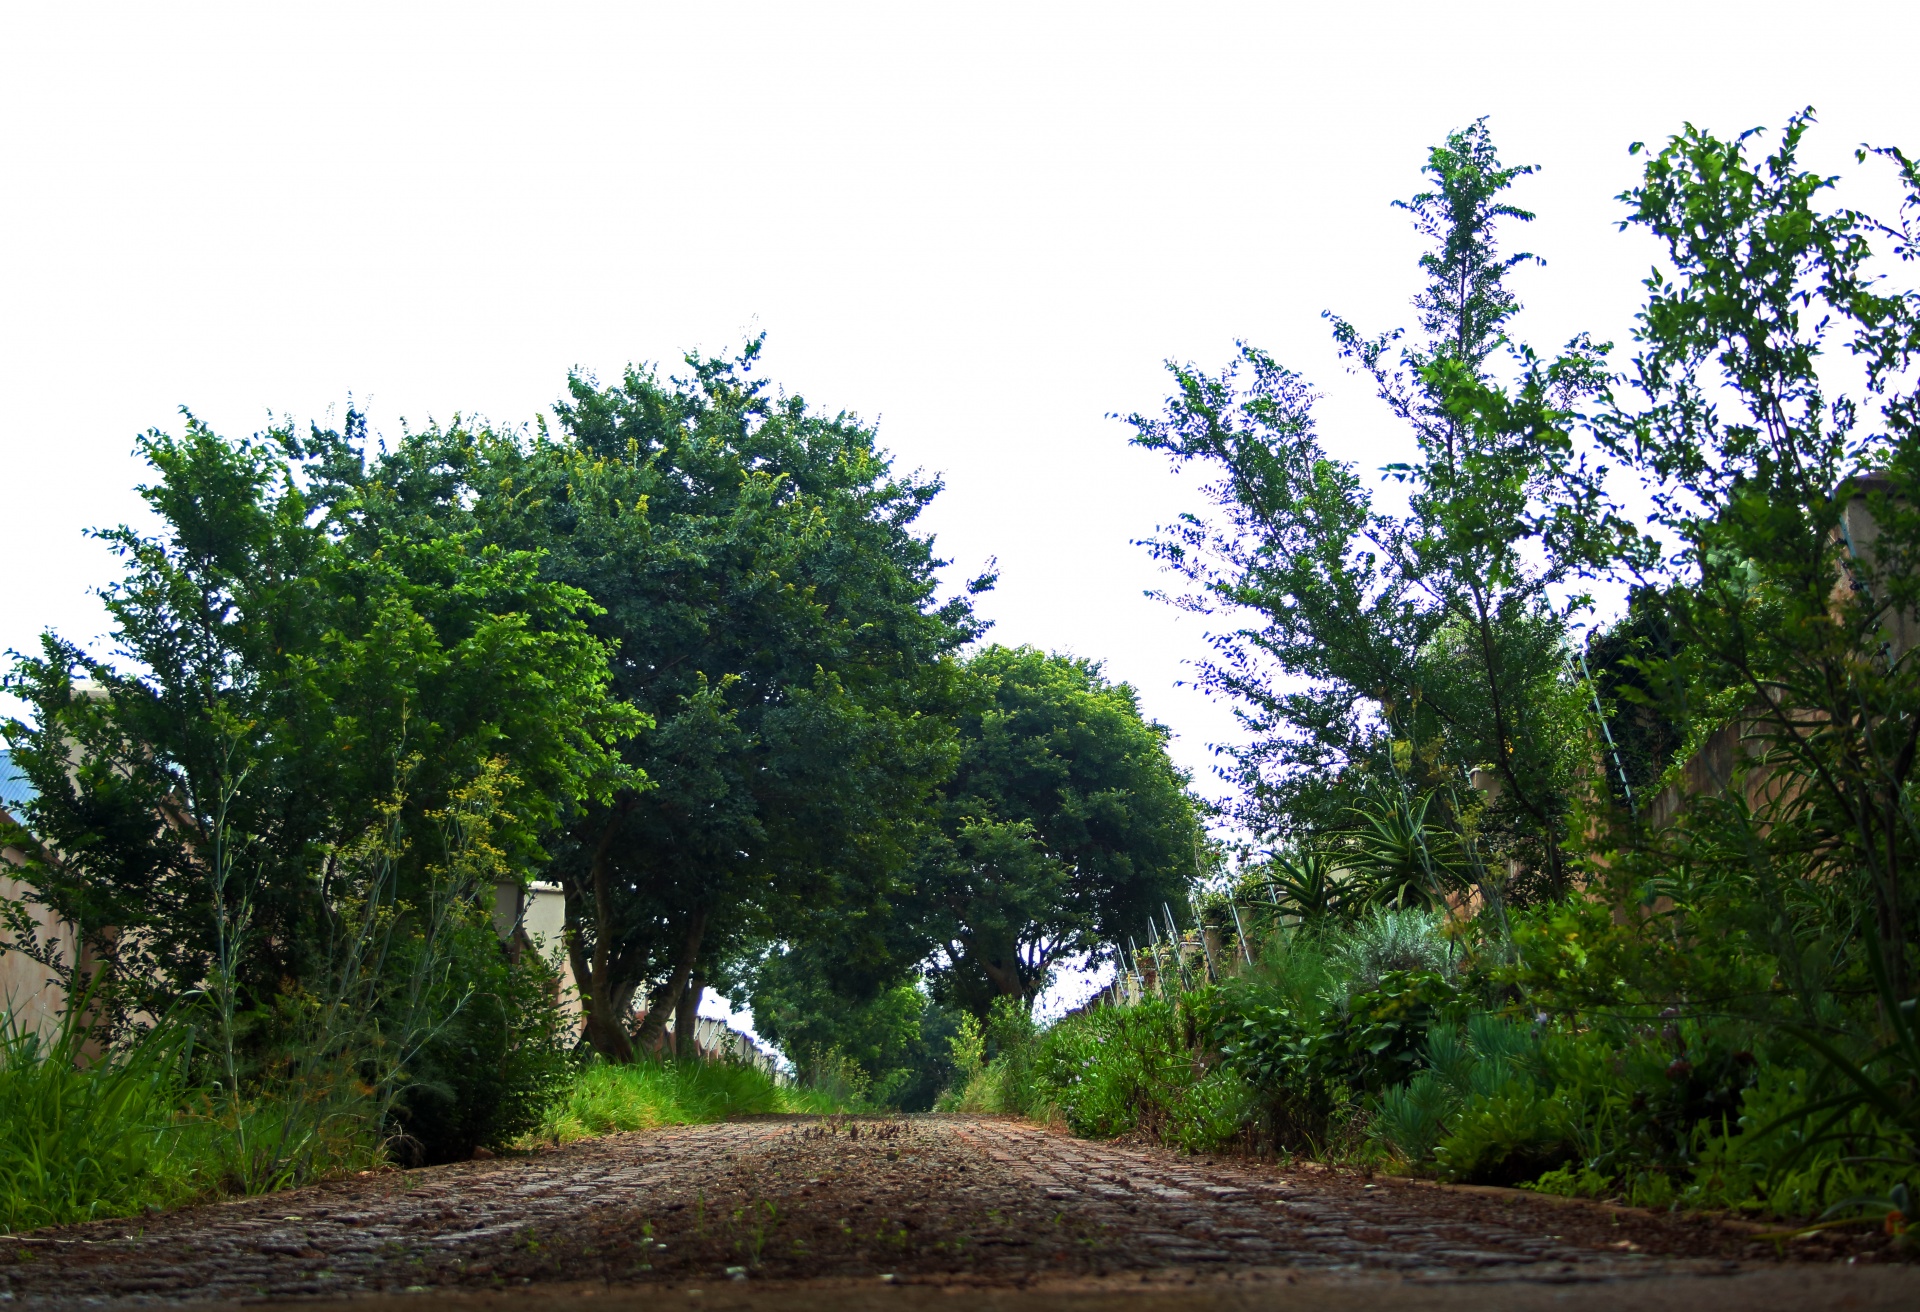 Upward View Of A Road And Trees